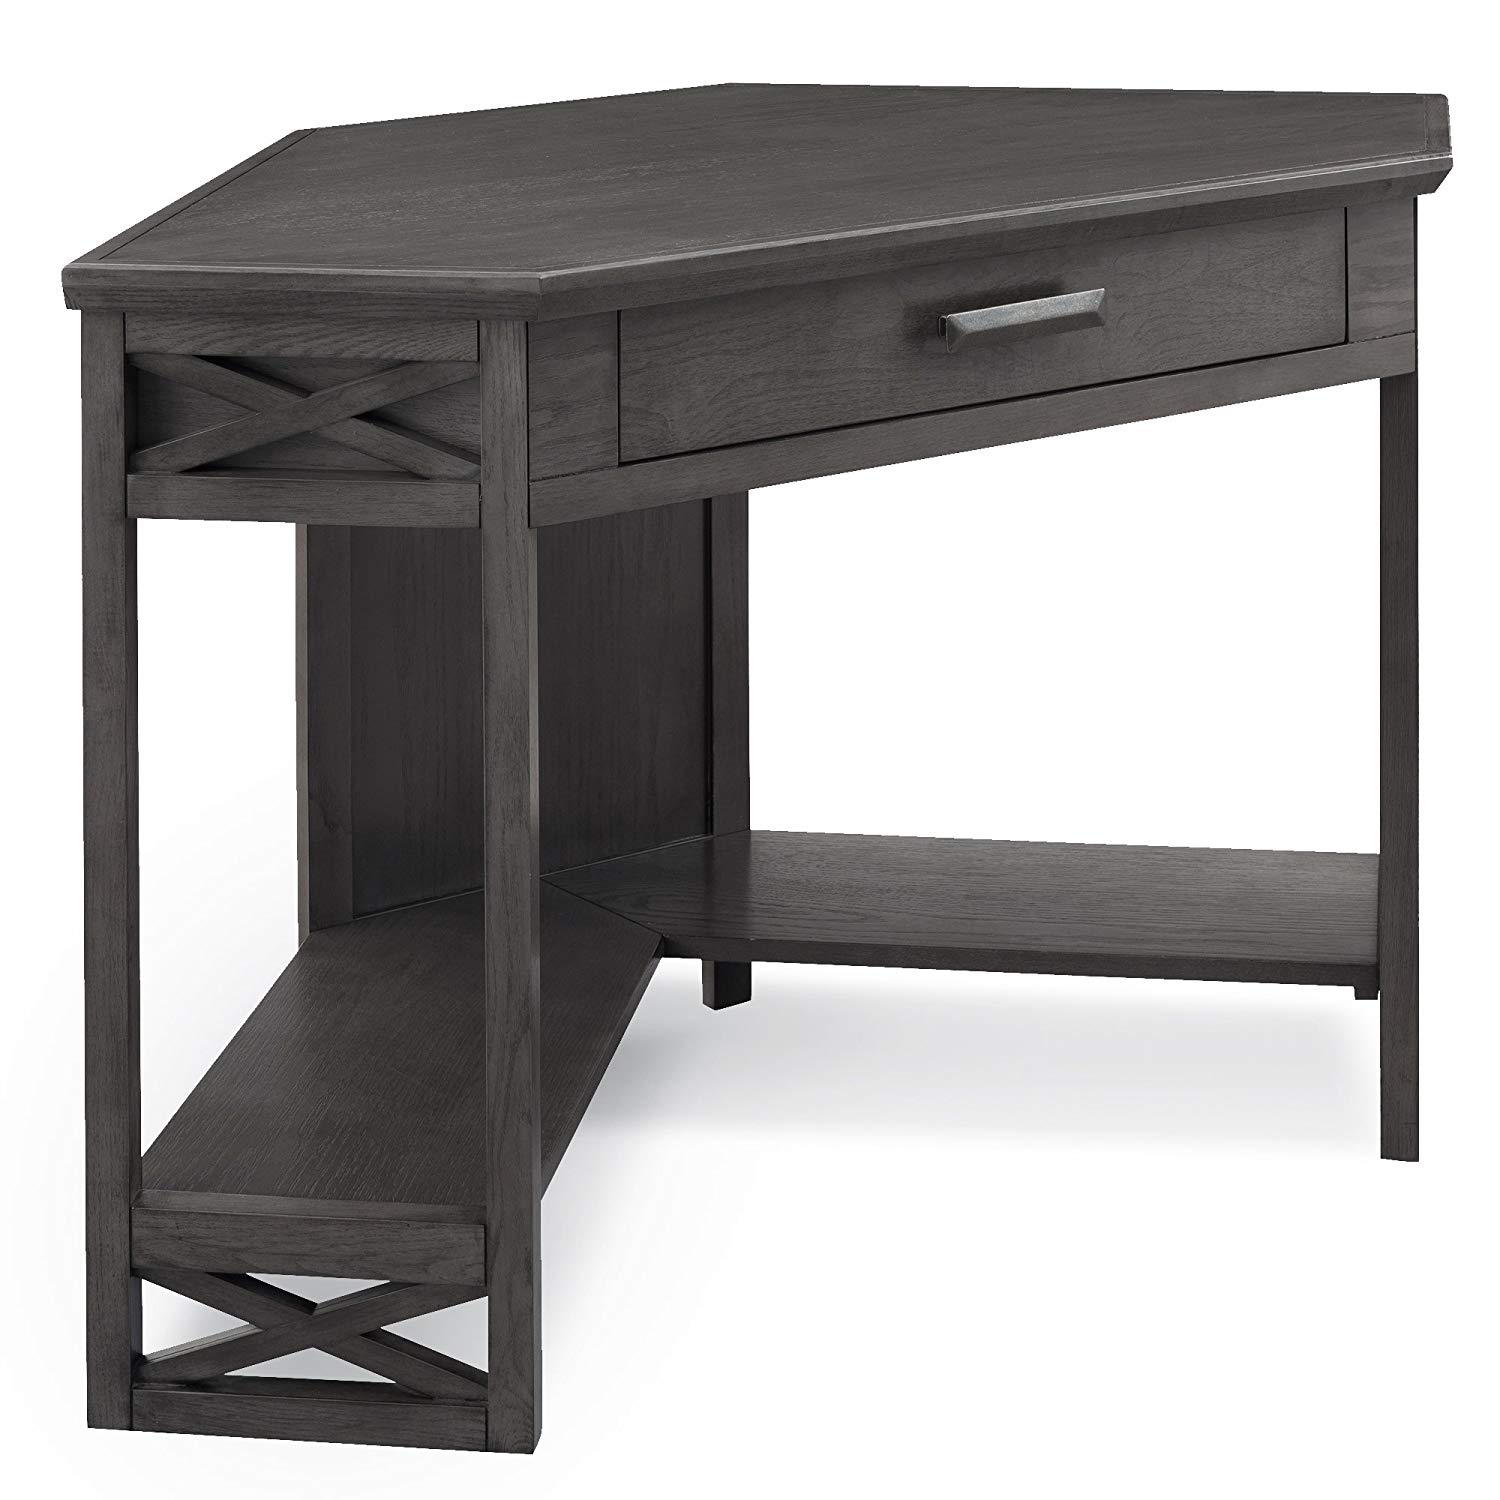 leick furniture oak corner computer writing desk cknl accent table smoke gray kitchen dining linens beach lamps rose gold round wicker end pottery barn trunk home goods decorative